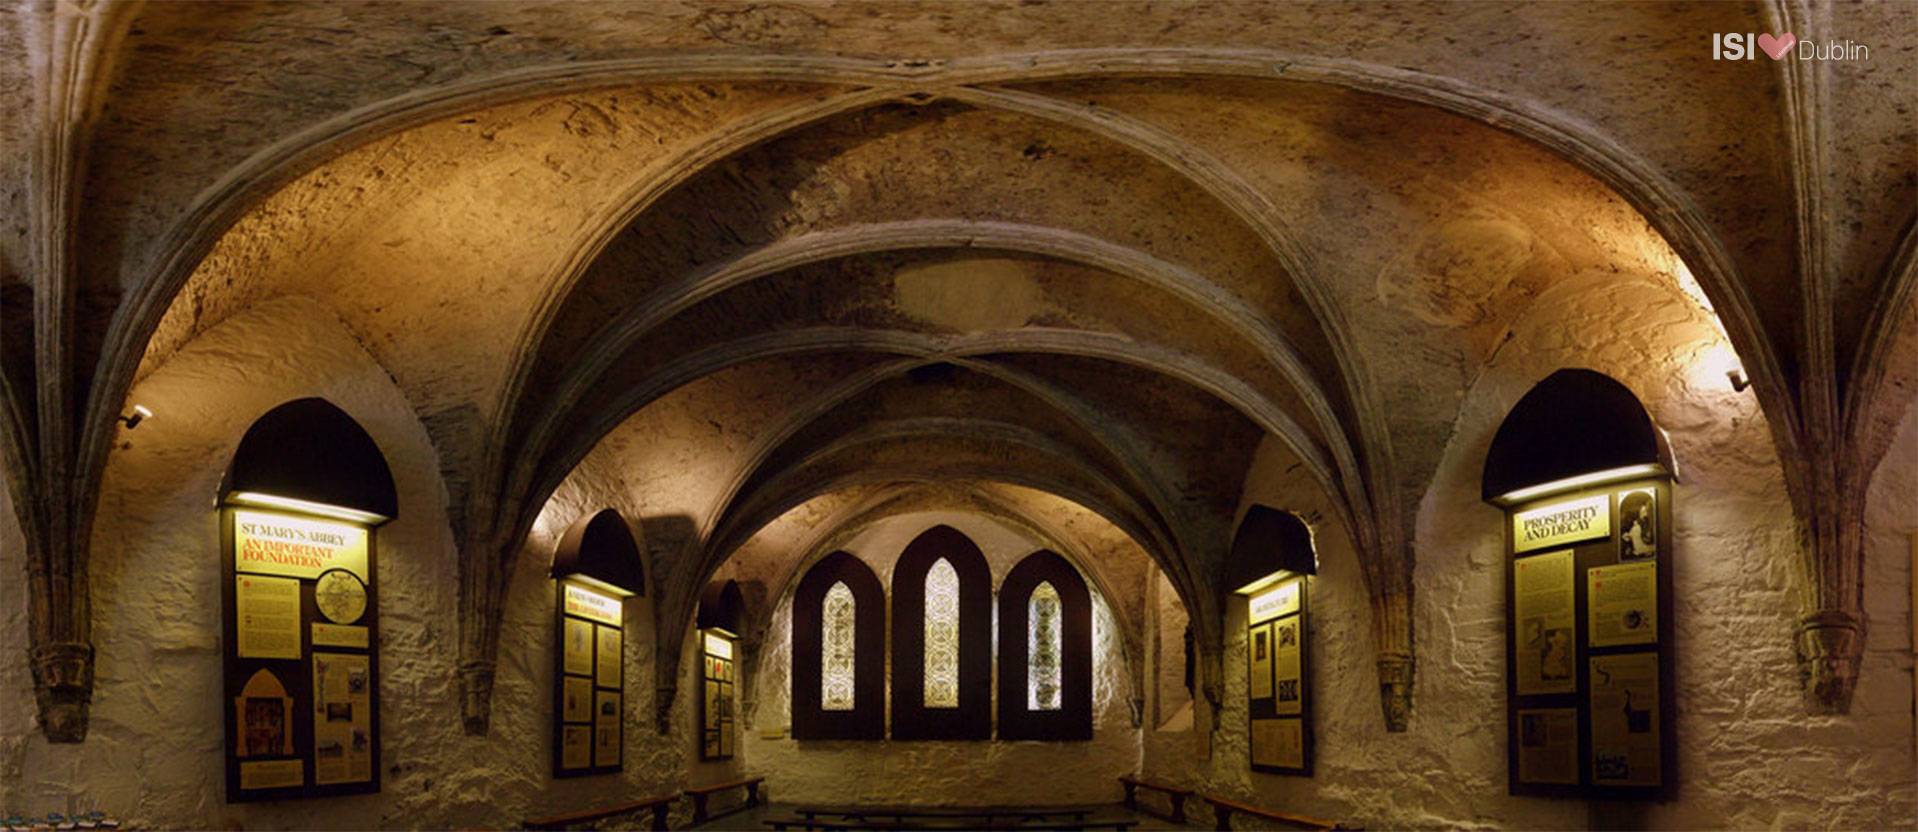 The arched stone roof of the Chapter House, in a 2008 photo auto-stitched from 42 smaller photographs by Andy Sheridan